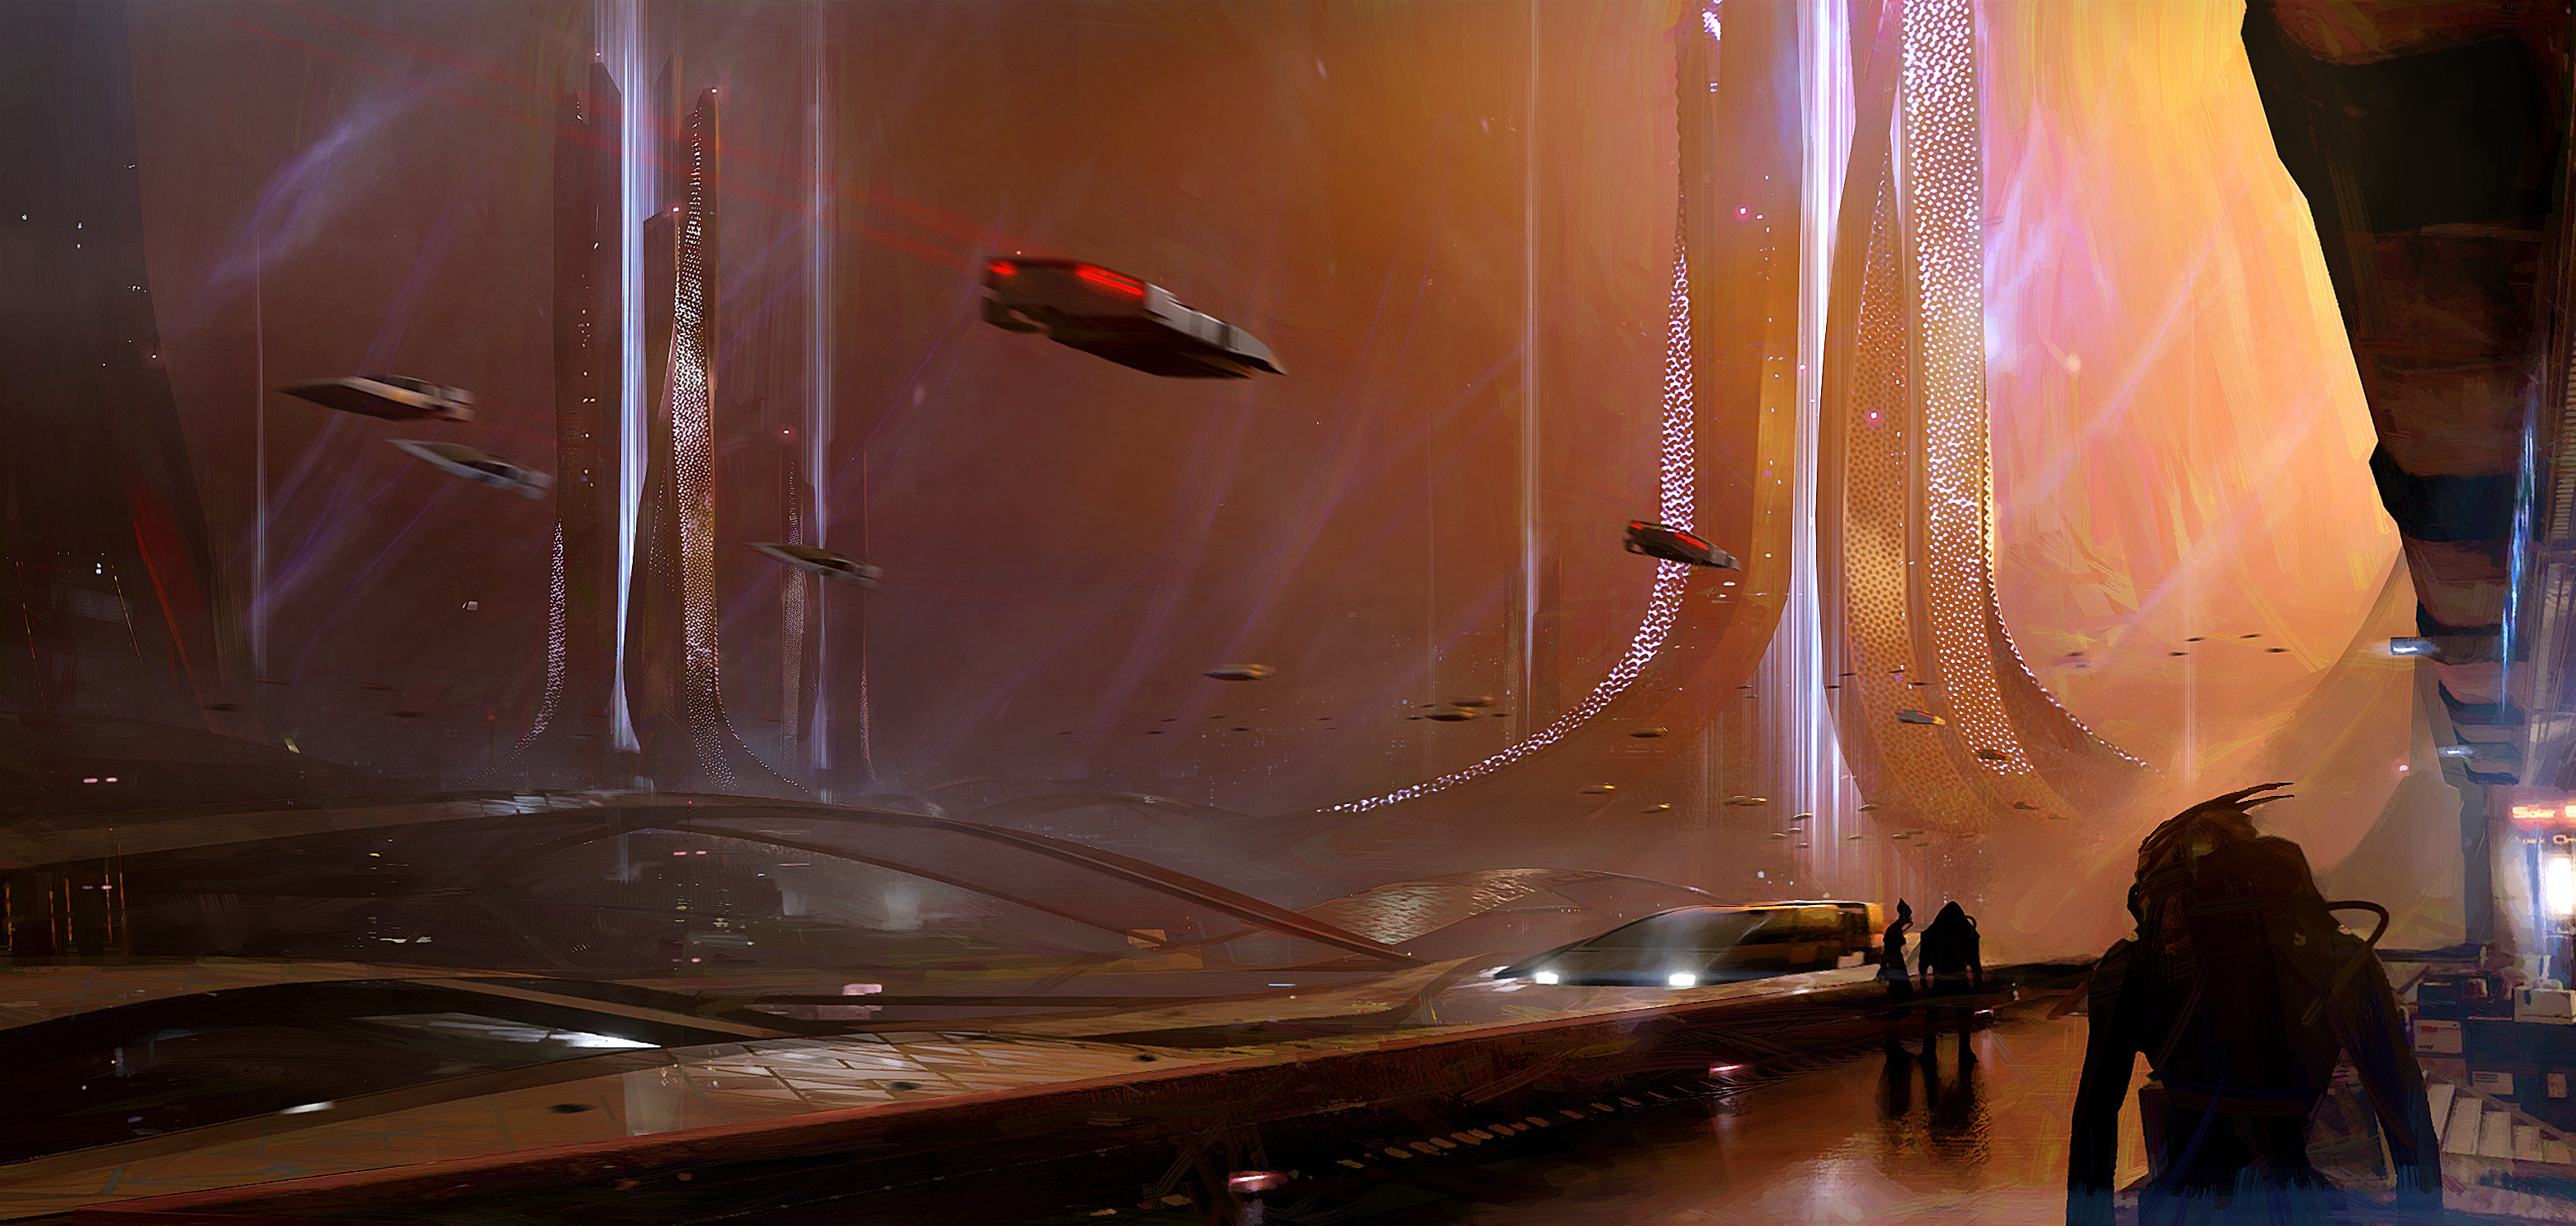 Mass Effect 5 teaser images published on N7 day featuring spaceships flying over futuristic cities